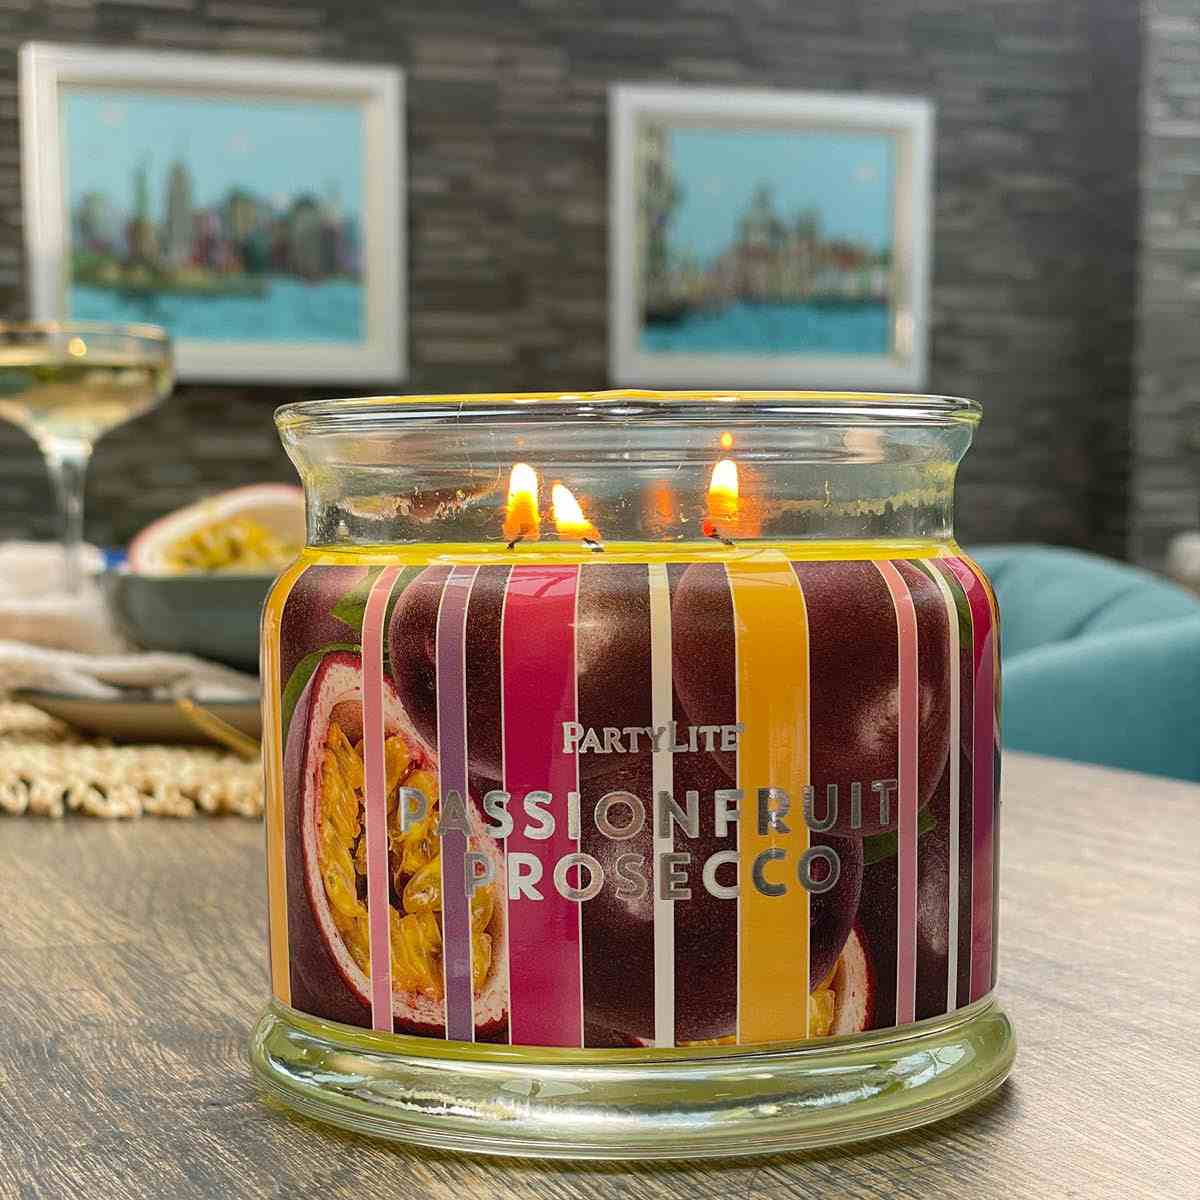 Passionfruit Prosecco 3-Wick Jar Candle - PartyLite US